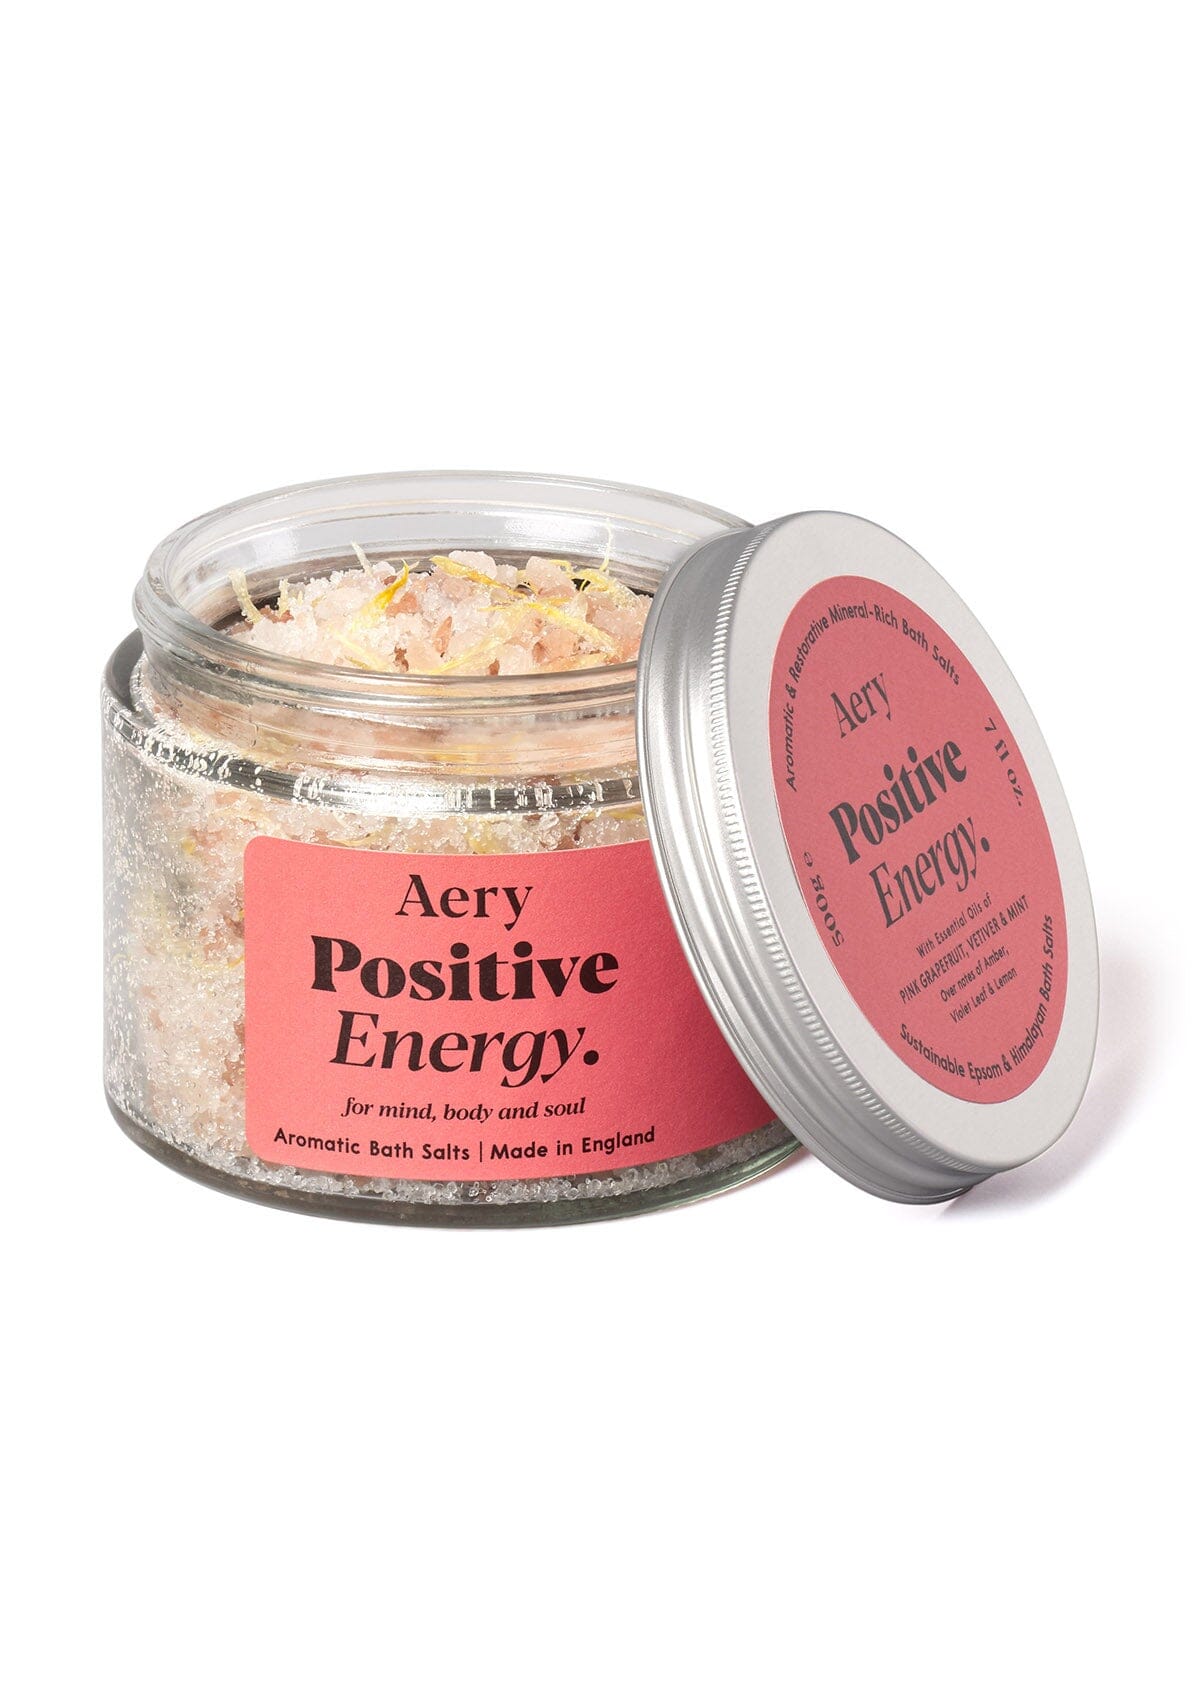 Red Positive Energy bath salts by Aery on white background 